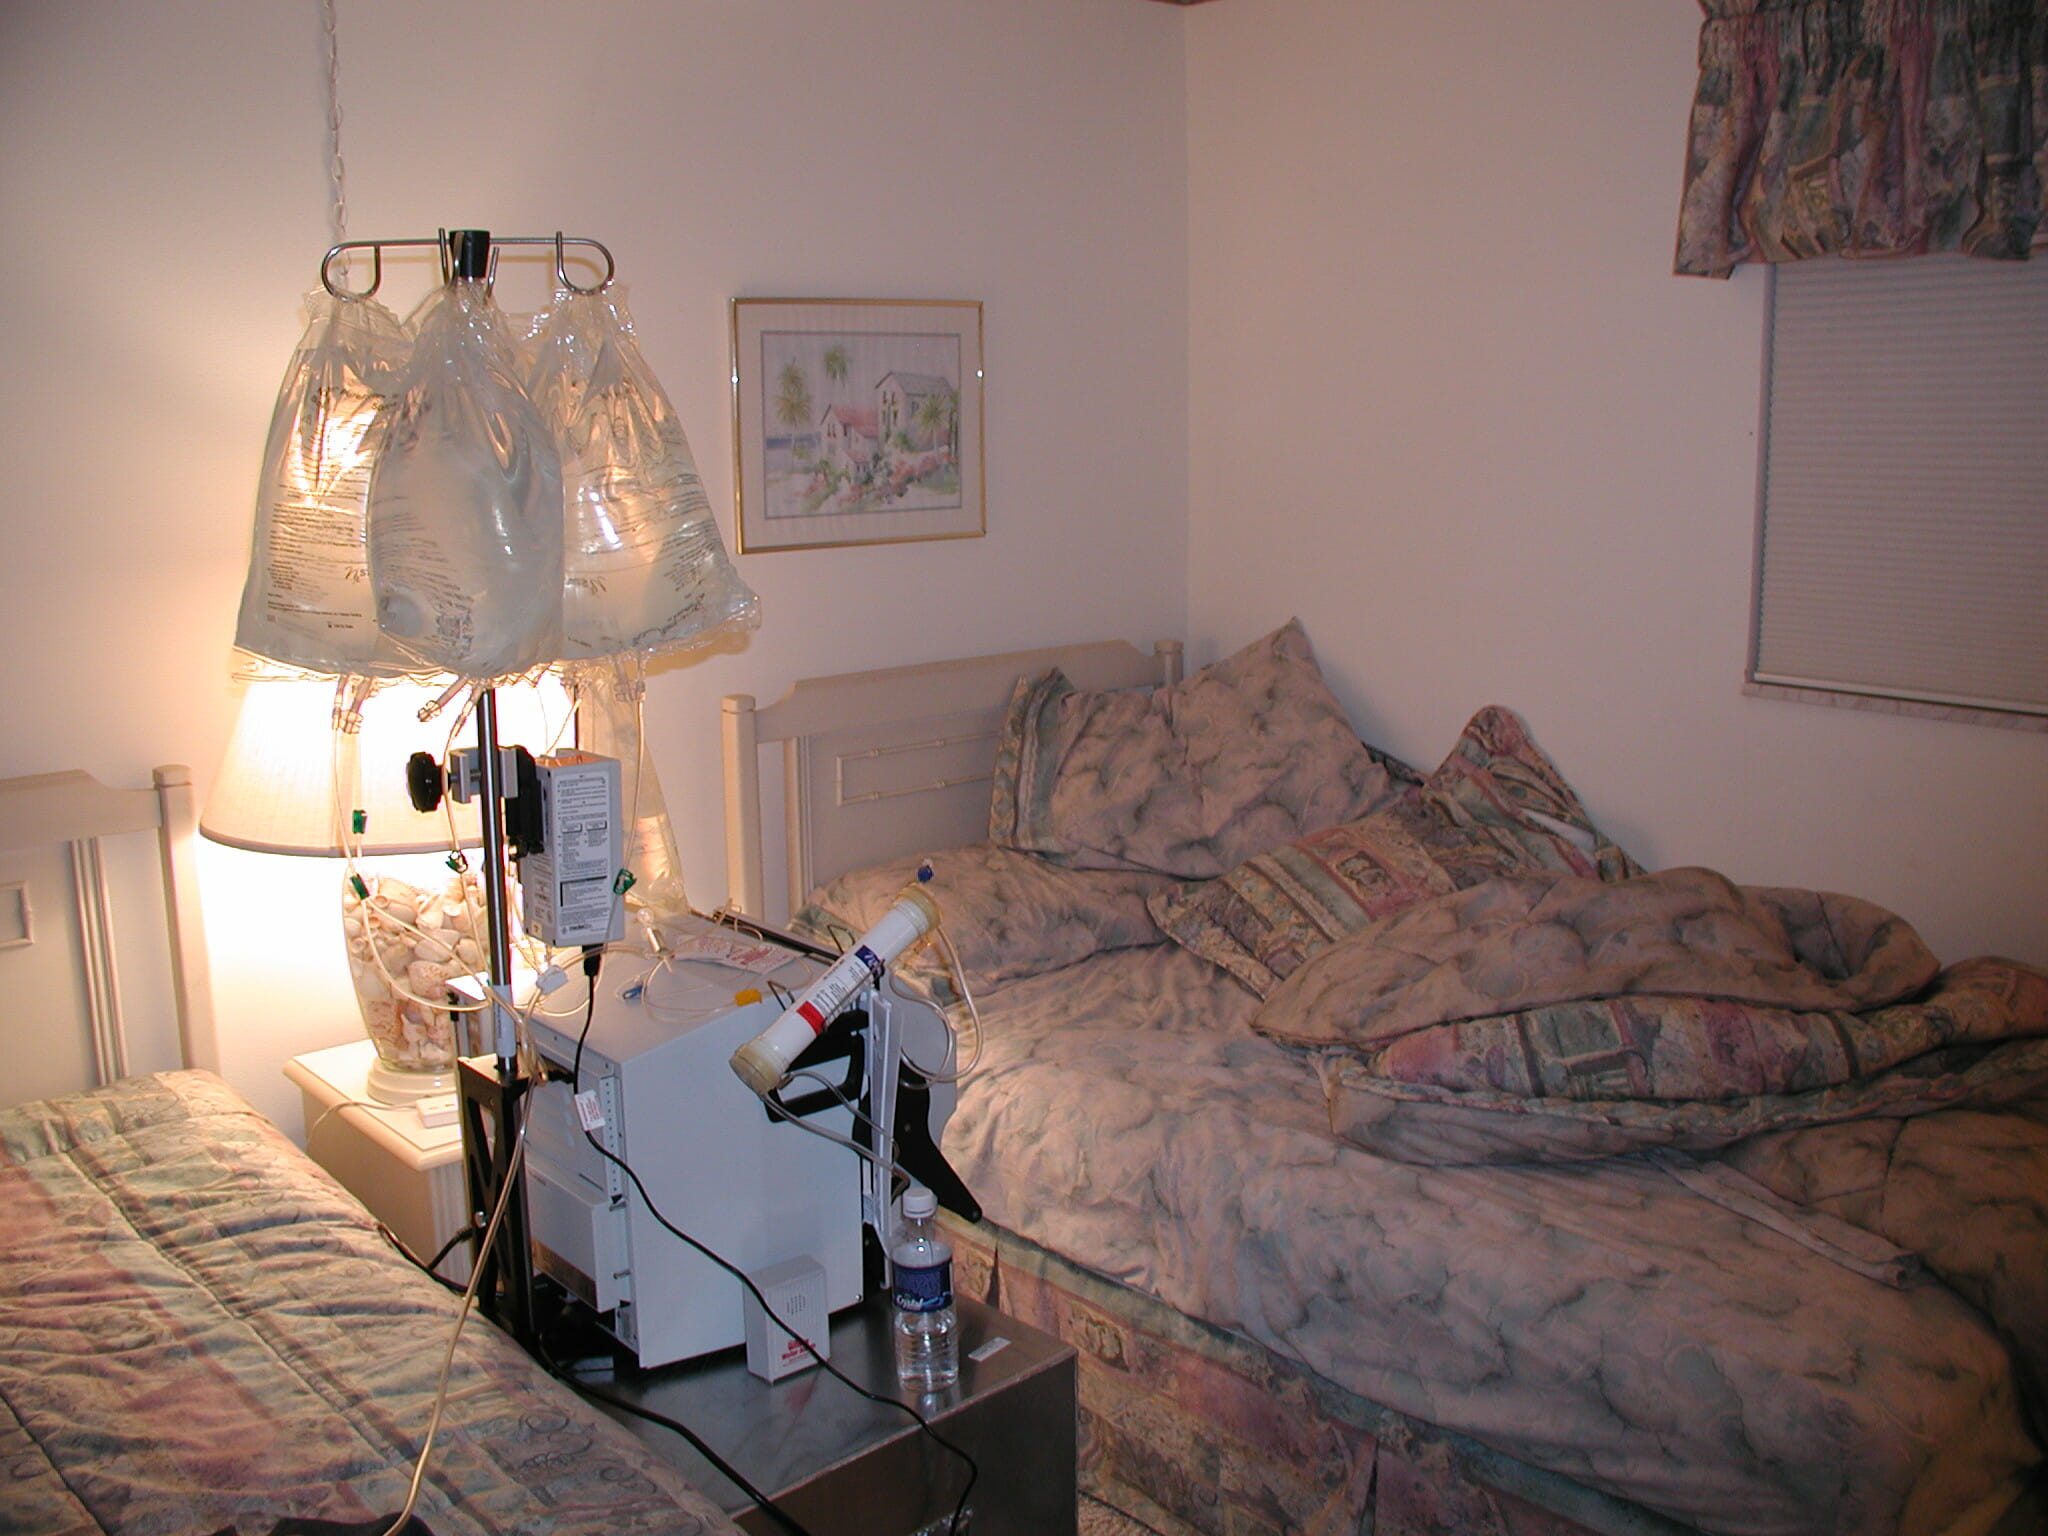 A hemodialysis machine in a bedroom.